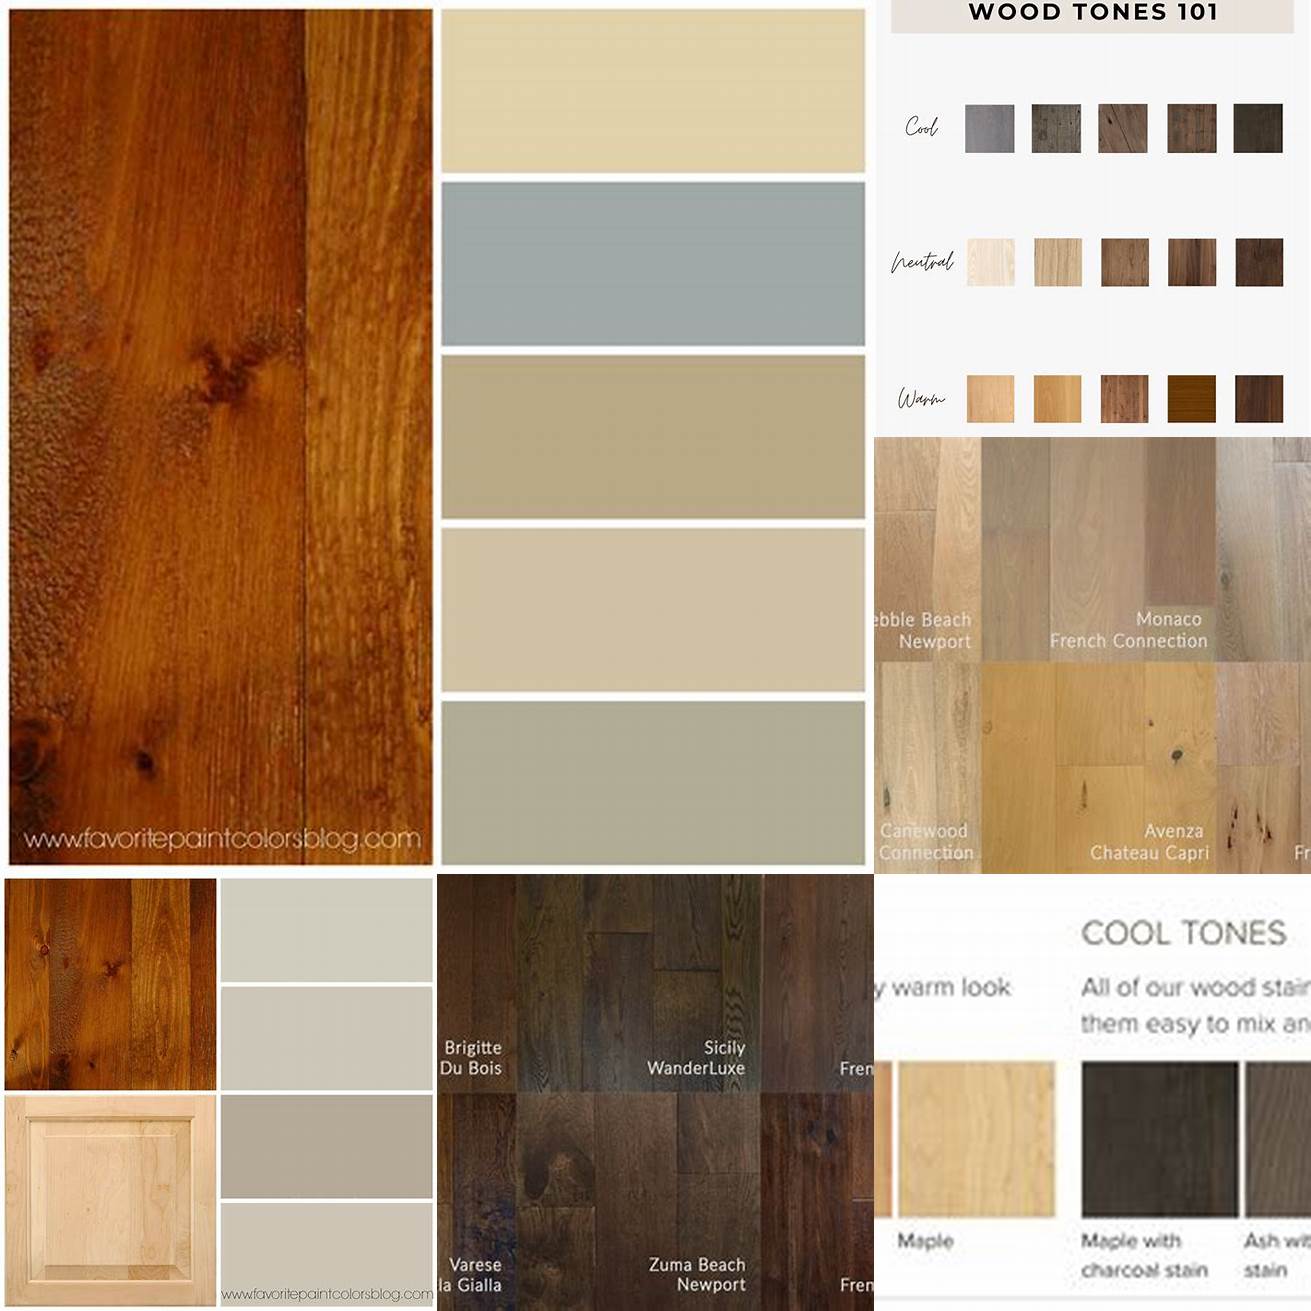 Pair with neutral colors Because pine wood has warm undertones it pairs well with neutral colors like white beige or gray This can help balance out the warmth of the wood and create a more cohesive look